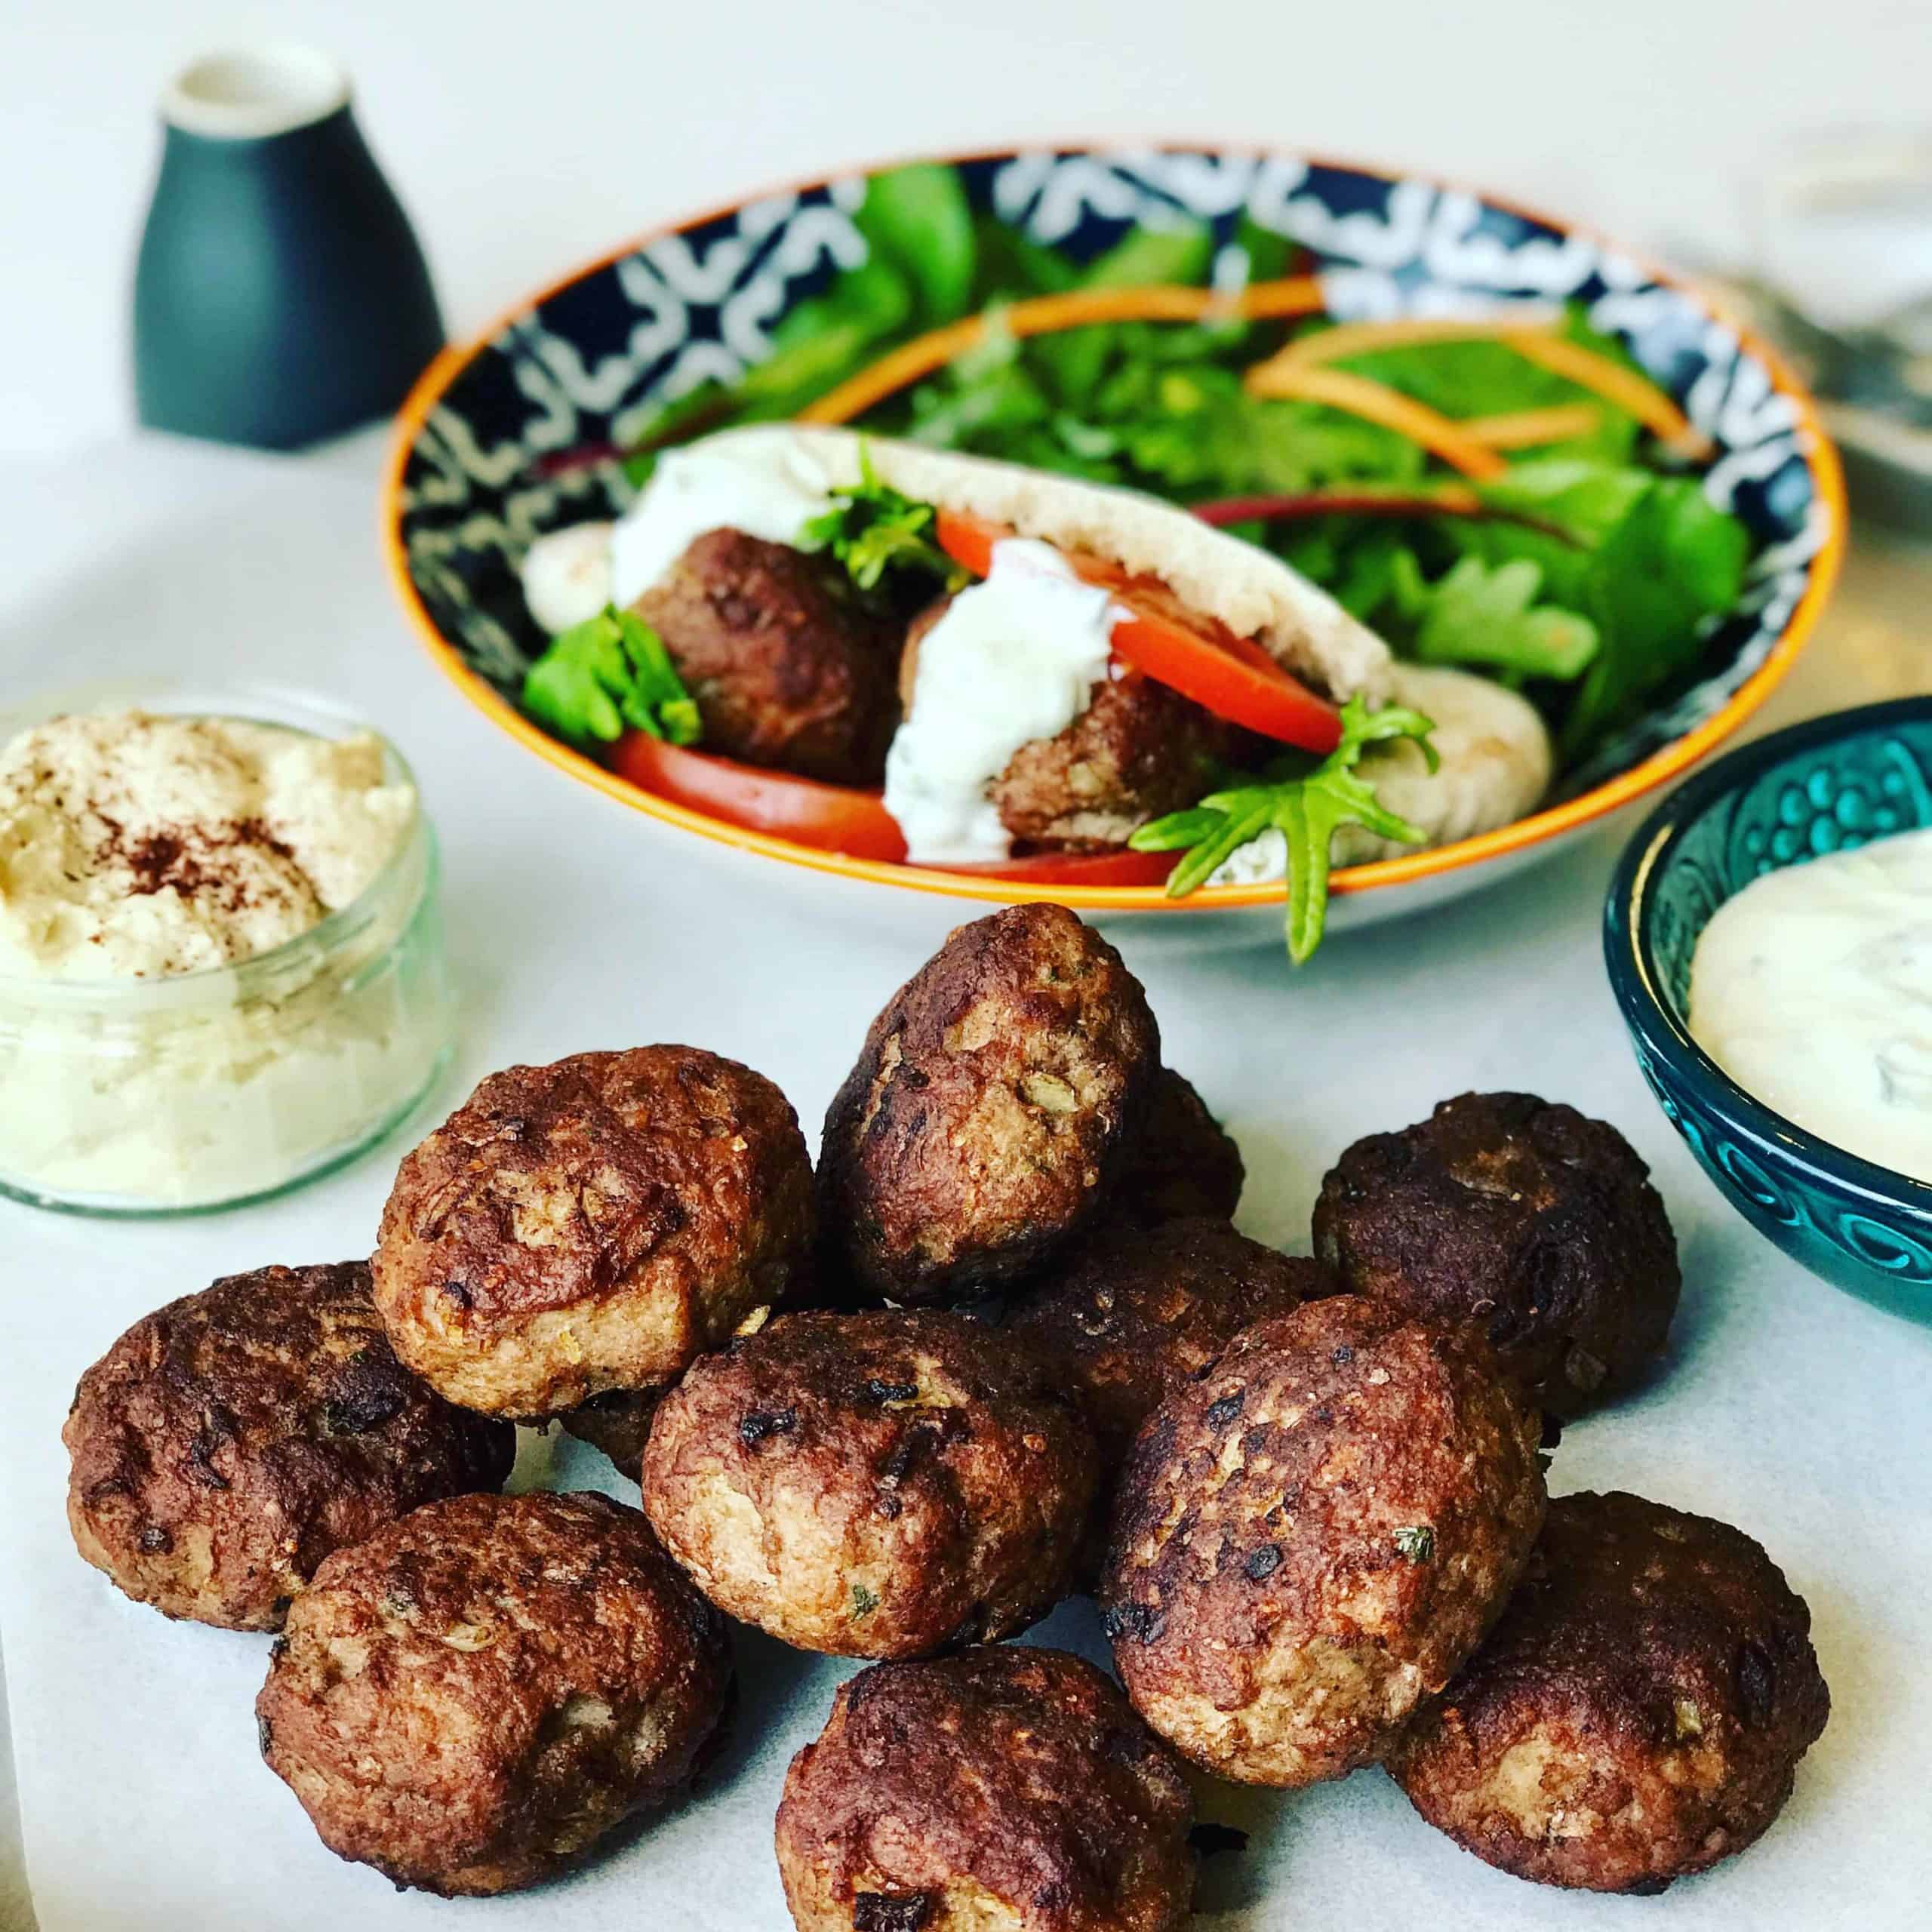 Lamb Patties in Pita Bread with salad is delicious summer meal or appetizer. It's like a small lamb burger, lamb meatball or lamb rissoles. Perfect as a lamb pita pocket or a lamb slider for lunch.